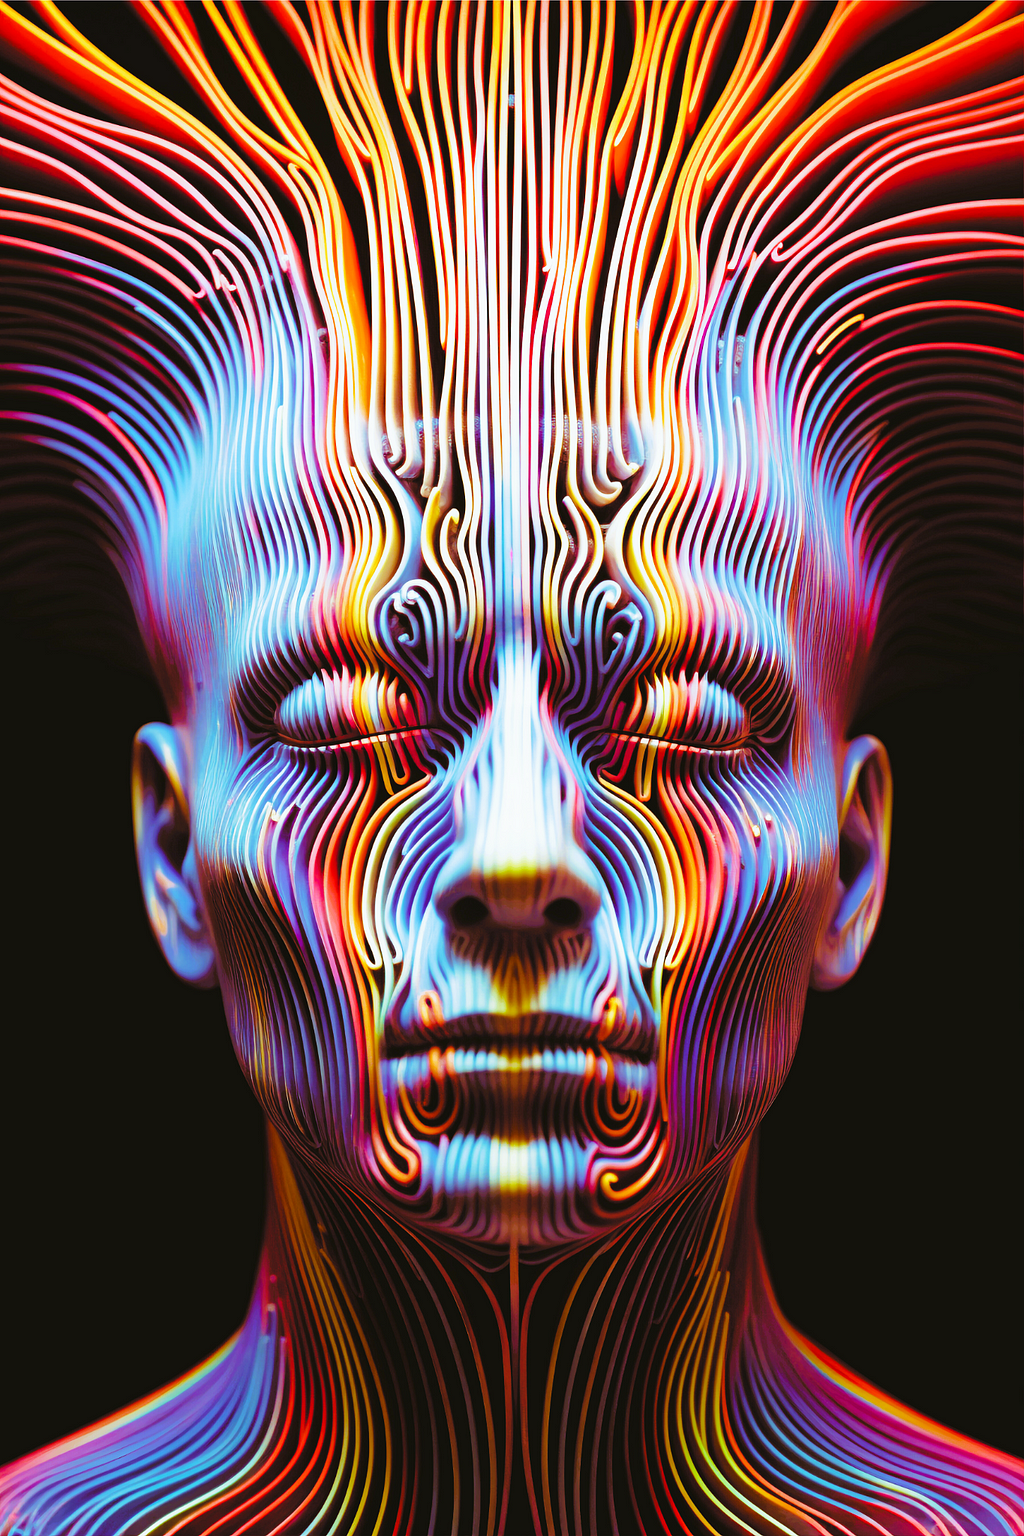 A computerized head/face generated by AI for spiritual awakening